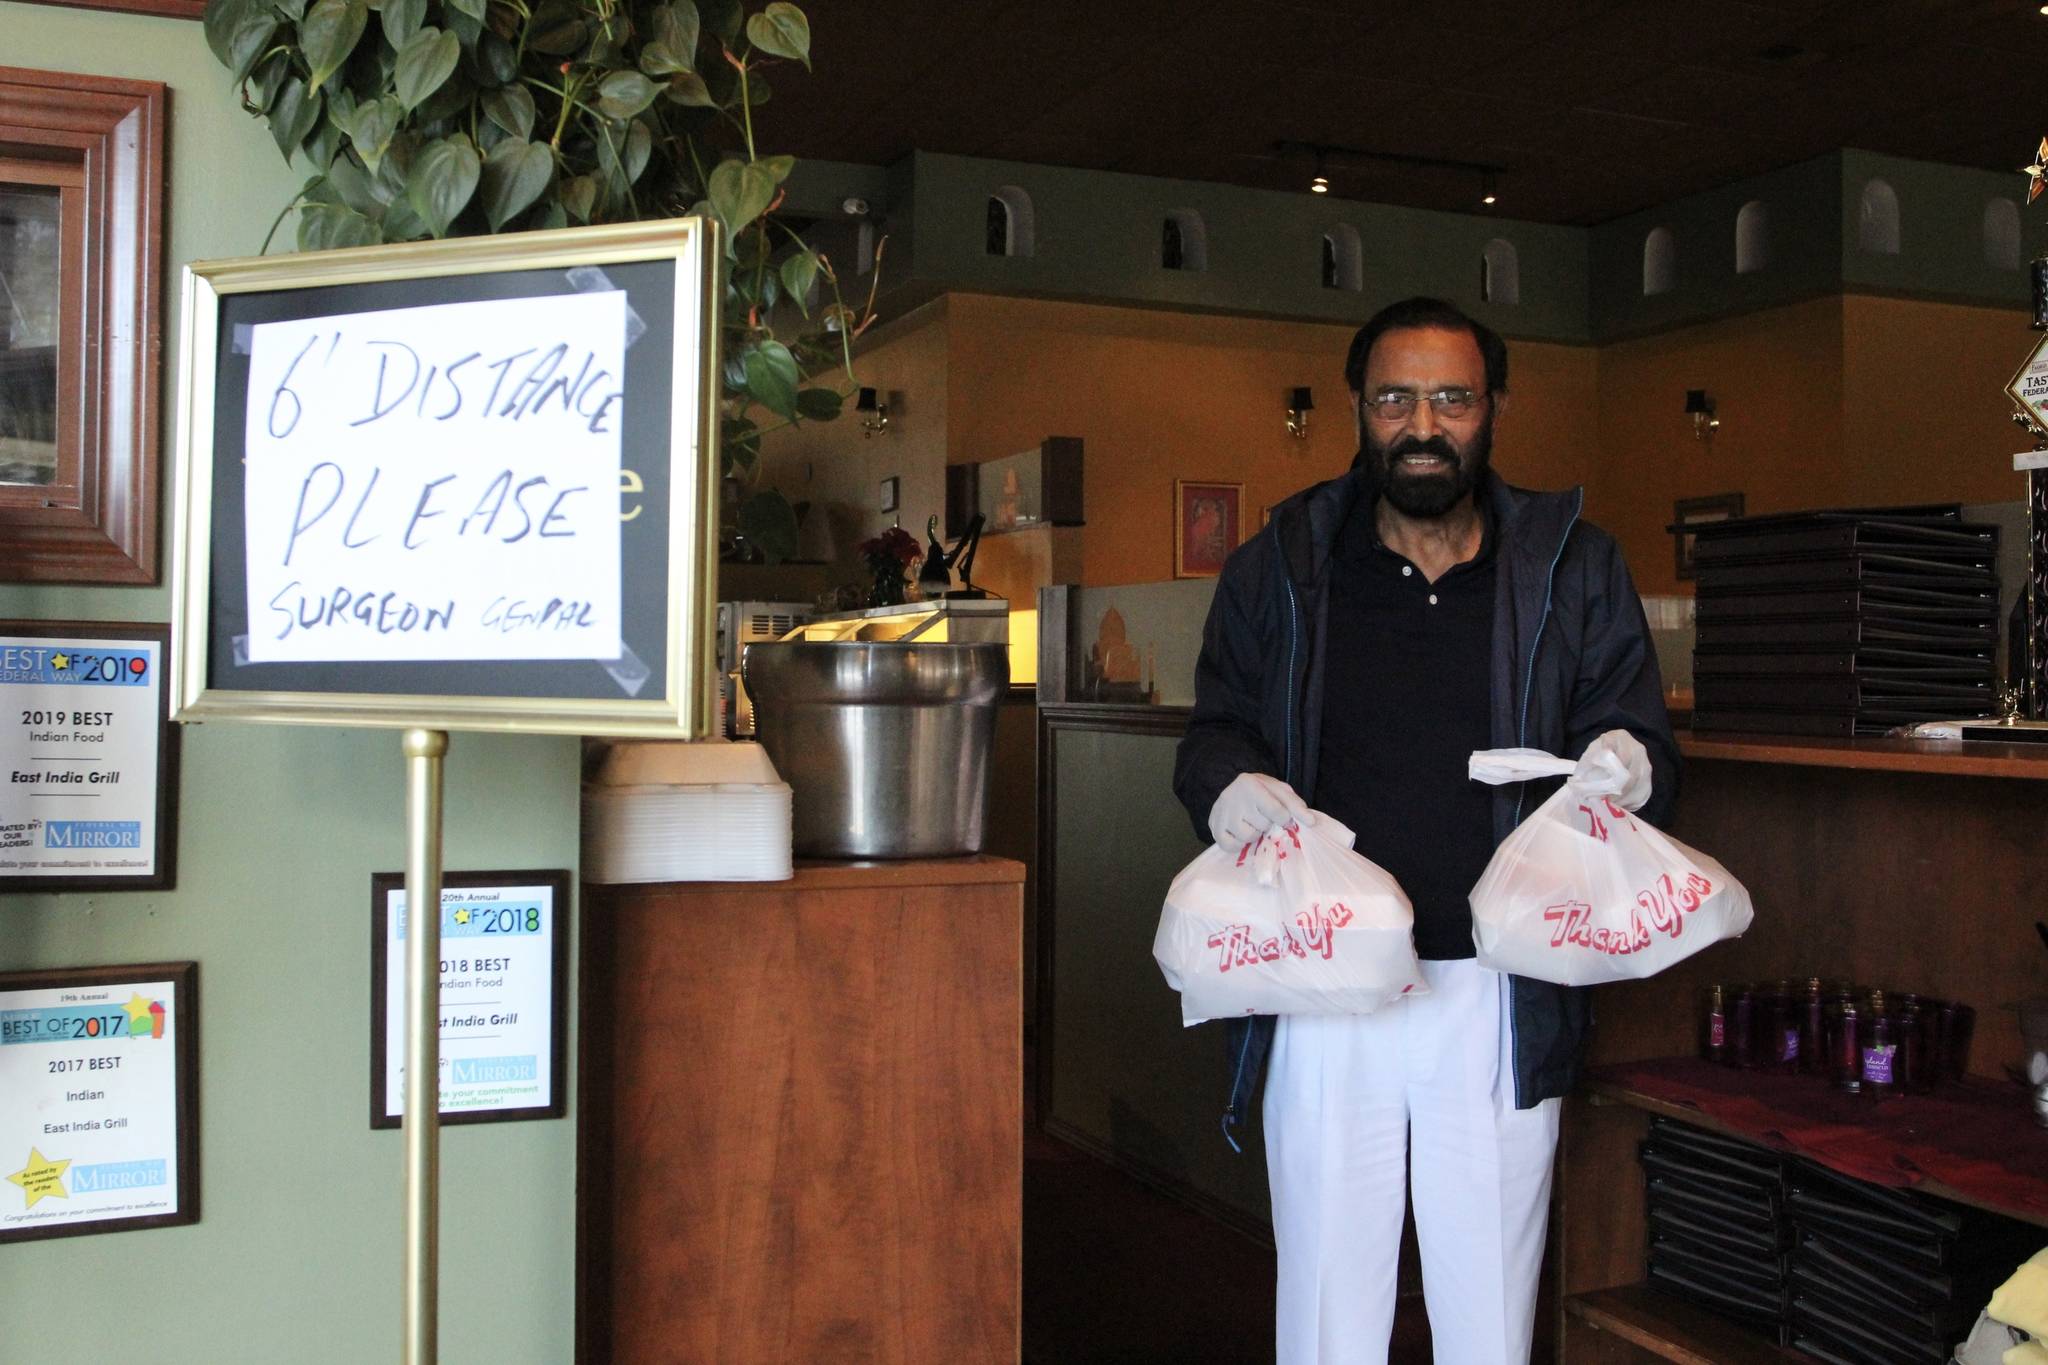 Kabal Gill, owner of East India Grill in Federal Way, wears gloves to hand over take-out orders at his restaurant on March 23. File photo